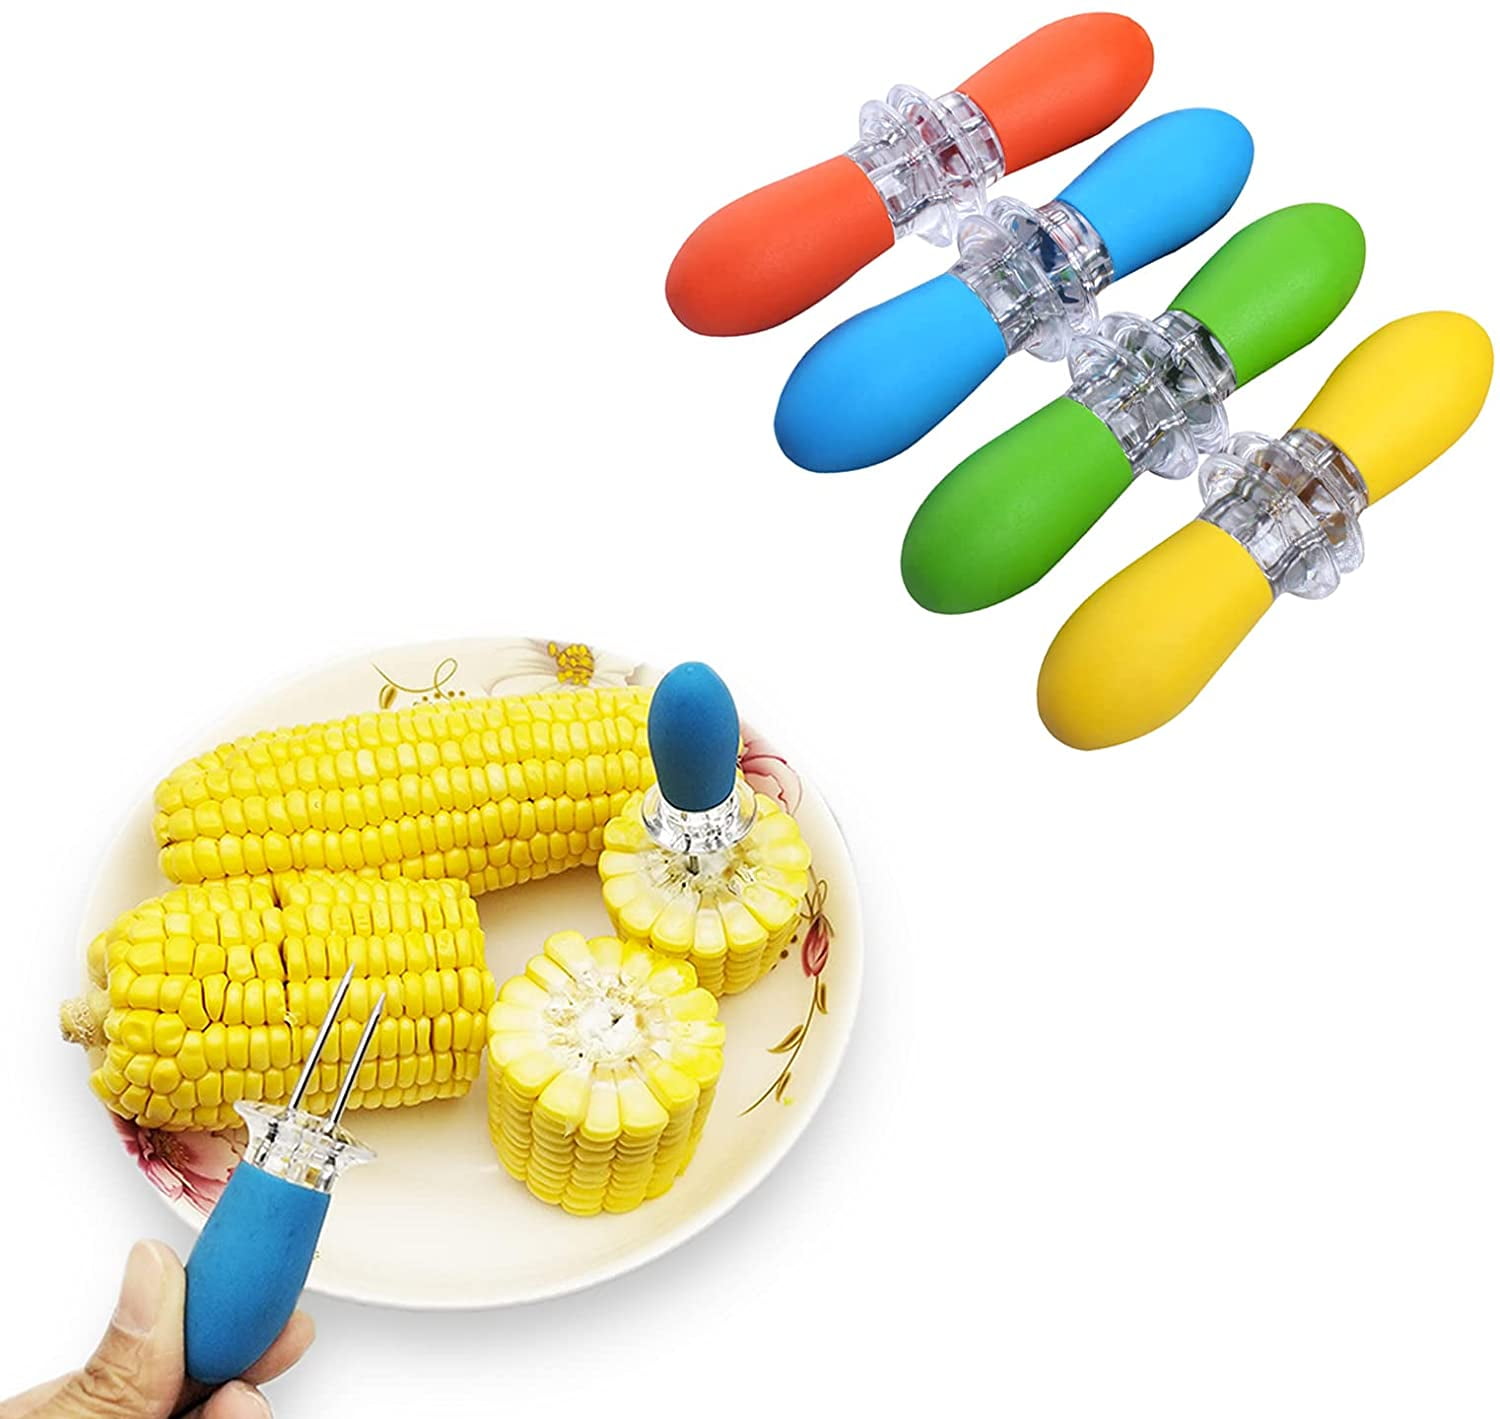 Corn on the Cob Forks Holders Stainless Steel Corn Cob Style Handle Pack of 6 